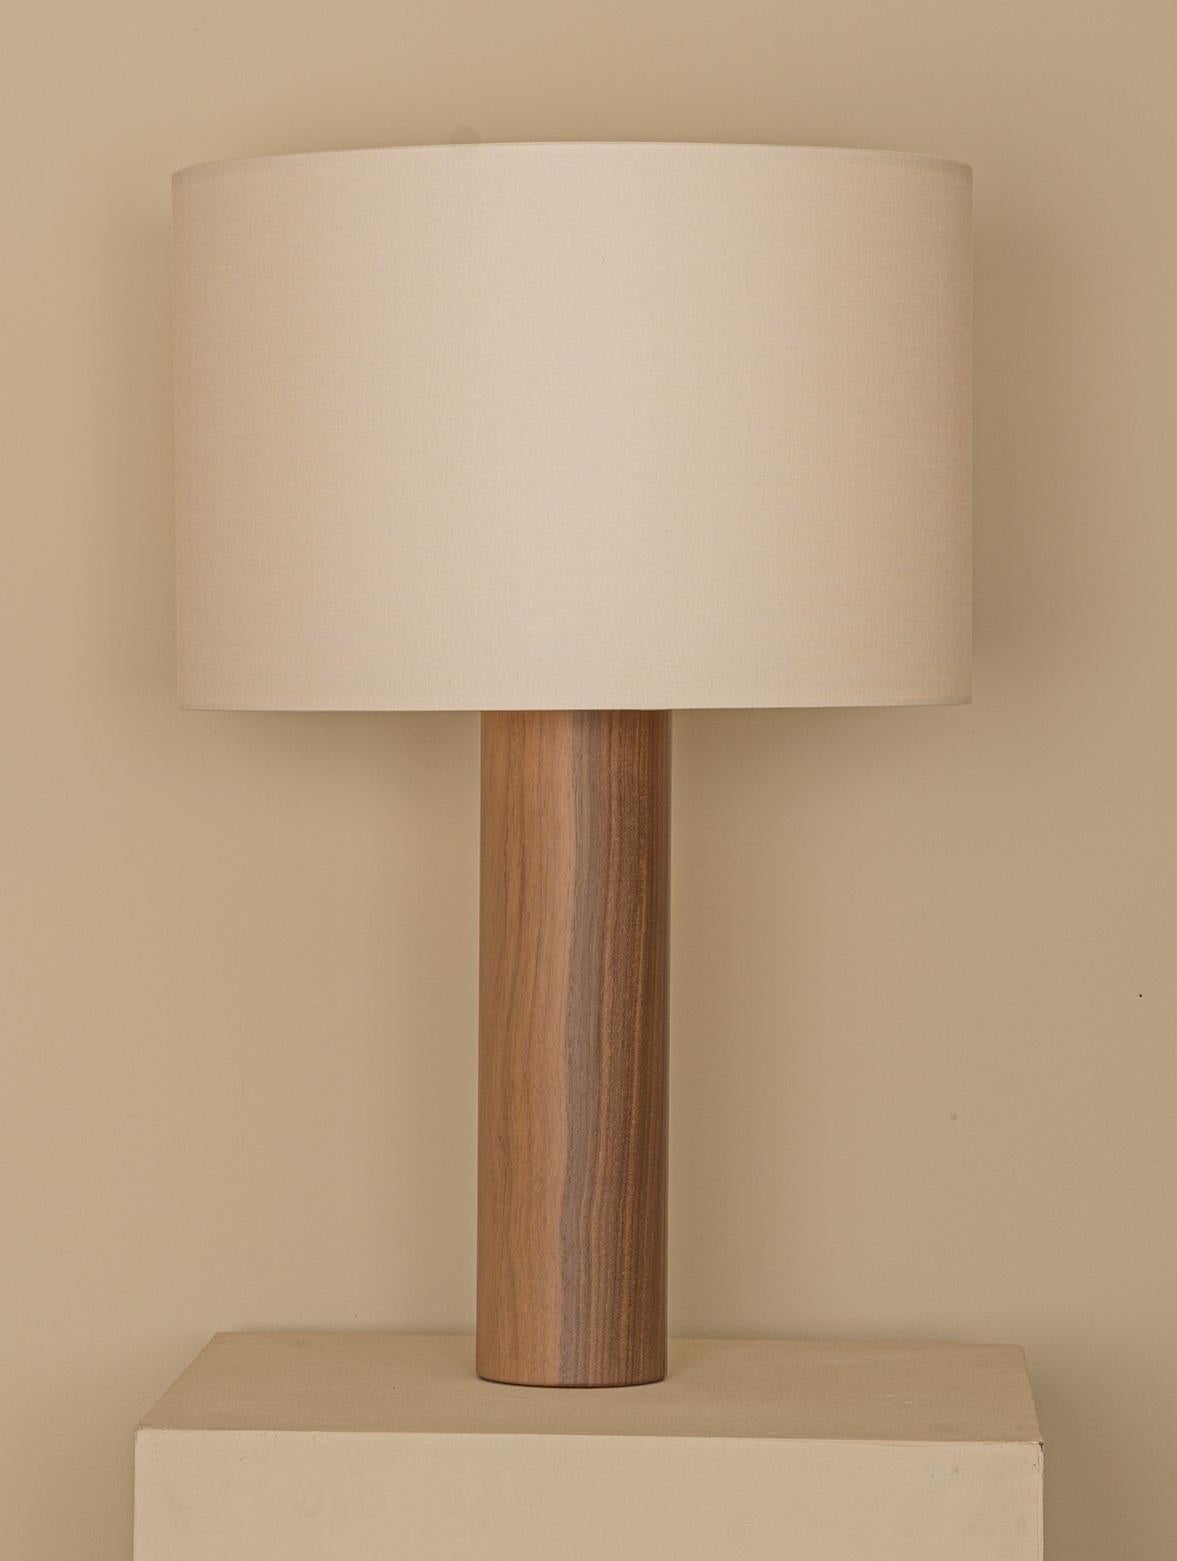 Walnut Pipo Table Lamp by Simone & Marcel
Dimensions: Ø 40 x H 58 cm.
Materials: Cotton and walnut wood.

Also available in different marble and wood options and finishes. Custom options available on request. Please contact us. 

All our lamps can